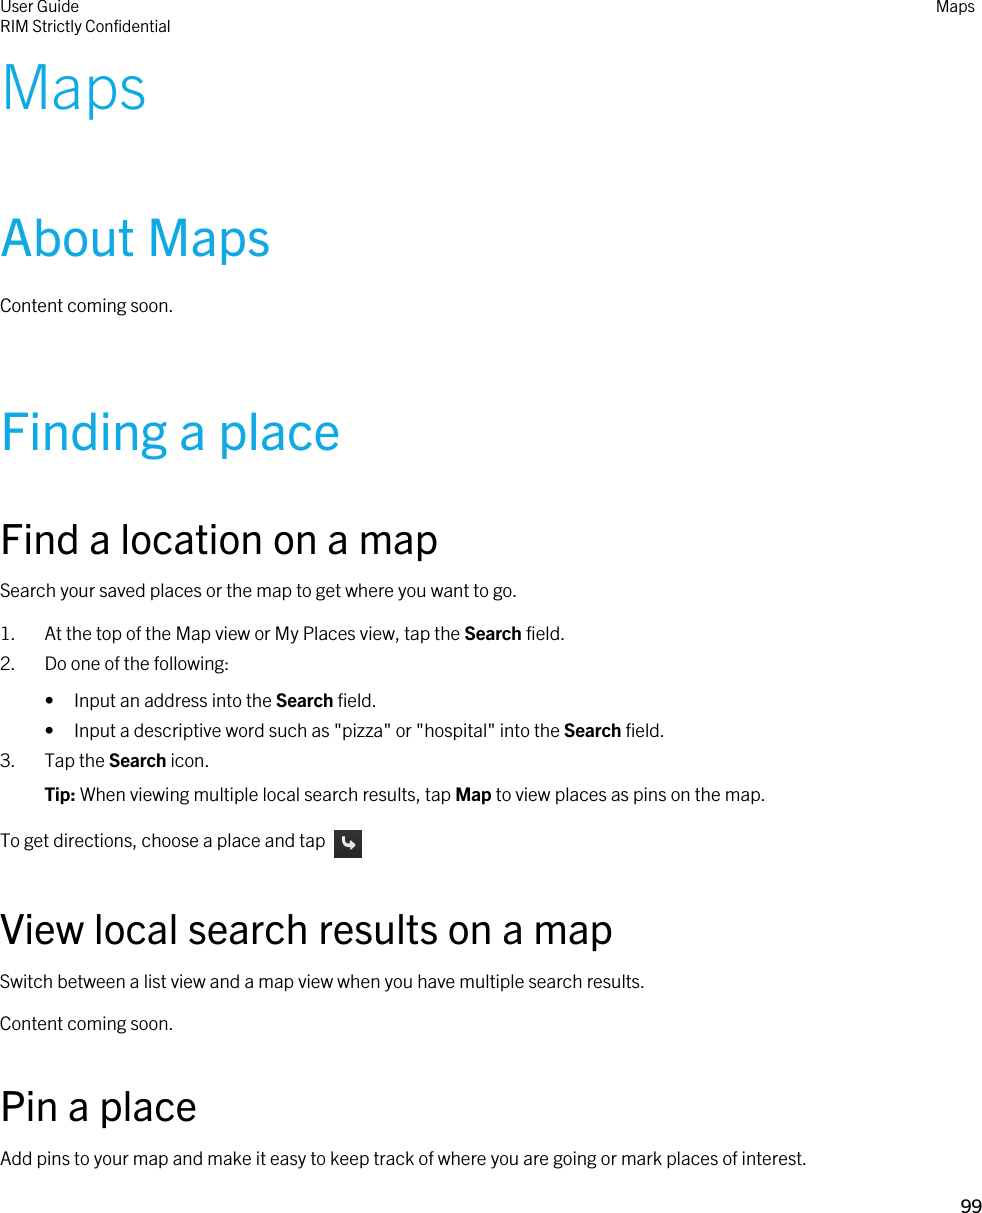 MapsAbout MapsContent coming soon.Finding a placeFind a location on a mapSearch your saved places or the map to get where you want to go.1. At the top of the Map view or My Places view, tap the Search field.2. Do one of the following:• Input an address into the Search field.• Input a descriptive word such as &quot;pizza&quot; or &quot;hospital&quot; into the Search field.3. Tap the Search icon.Tip: When viewing multiple local search results, tap Map to view places as pins on the map.To get directions, choose a place and tap View local search results on a mapSwitch between a list view and a map view when you have multiple search results.Content coming soon.Pin a placeAdd pins to your map and make it easy to keep track of where you are going or mark places of interest.User GuideRIM Strictly Confidential Maps99 